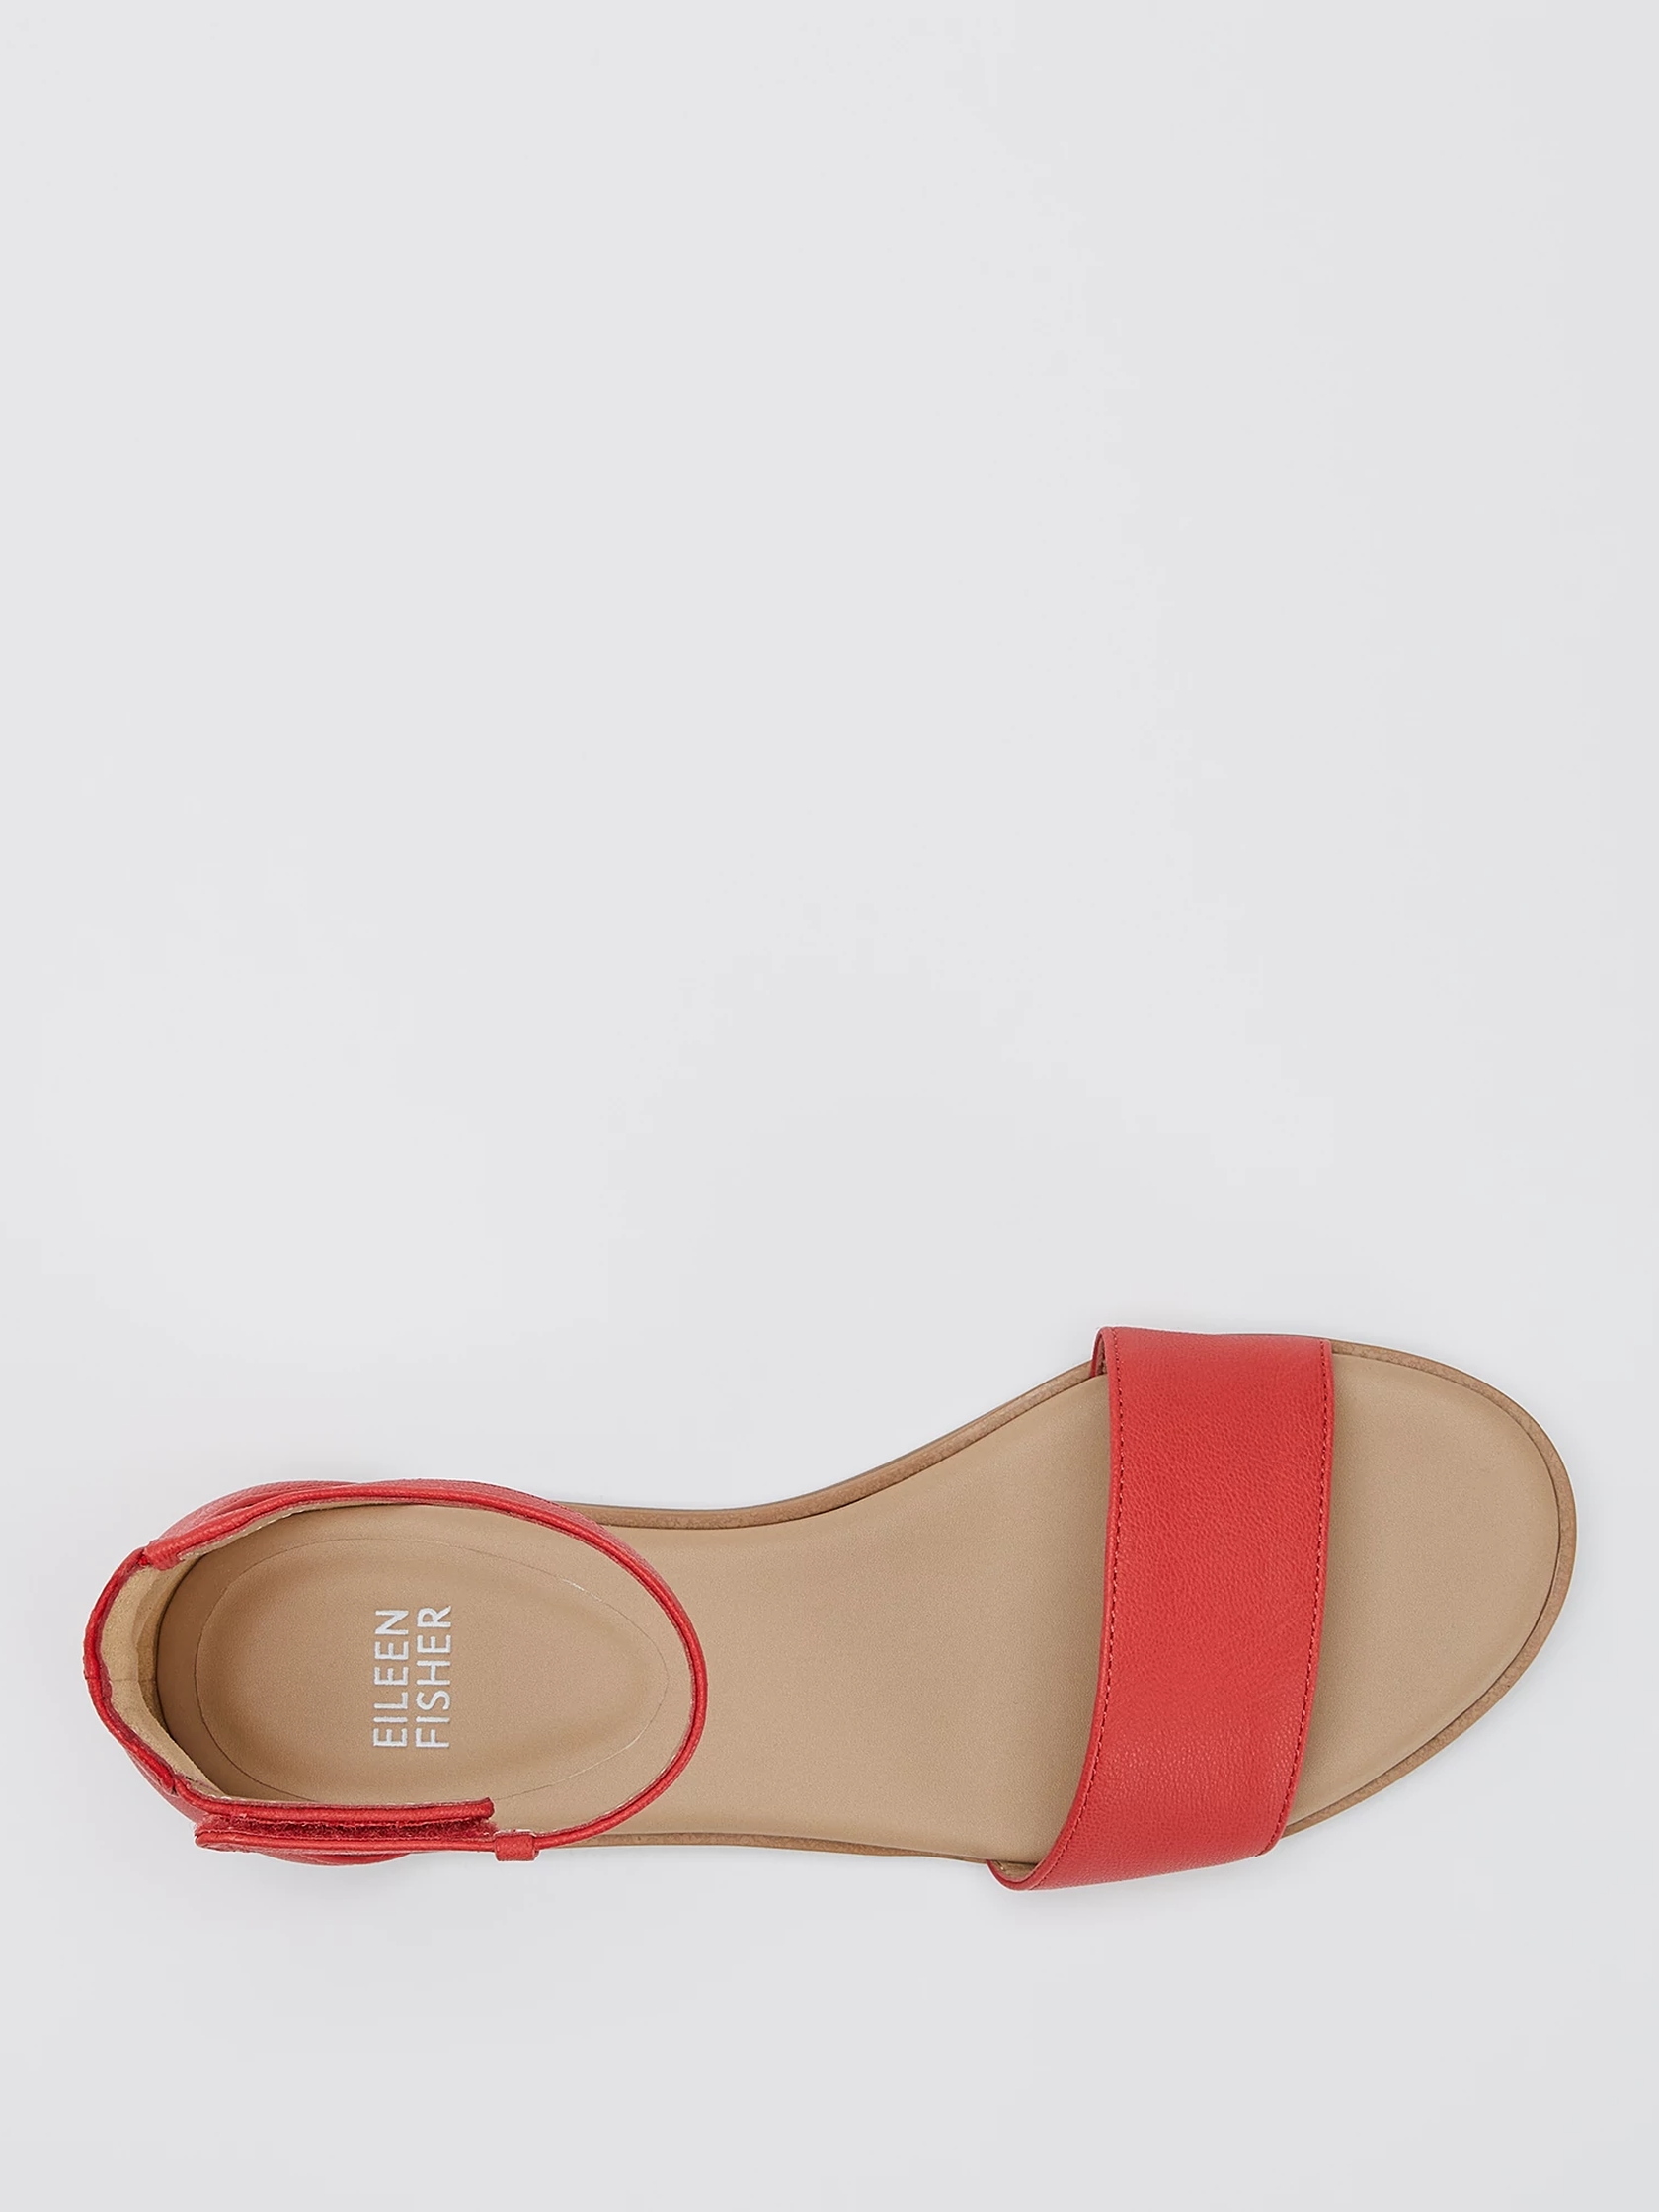 Razz Tumbled Leather Ankle-Strap Sandal | EILEEN FISHER